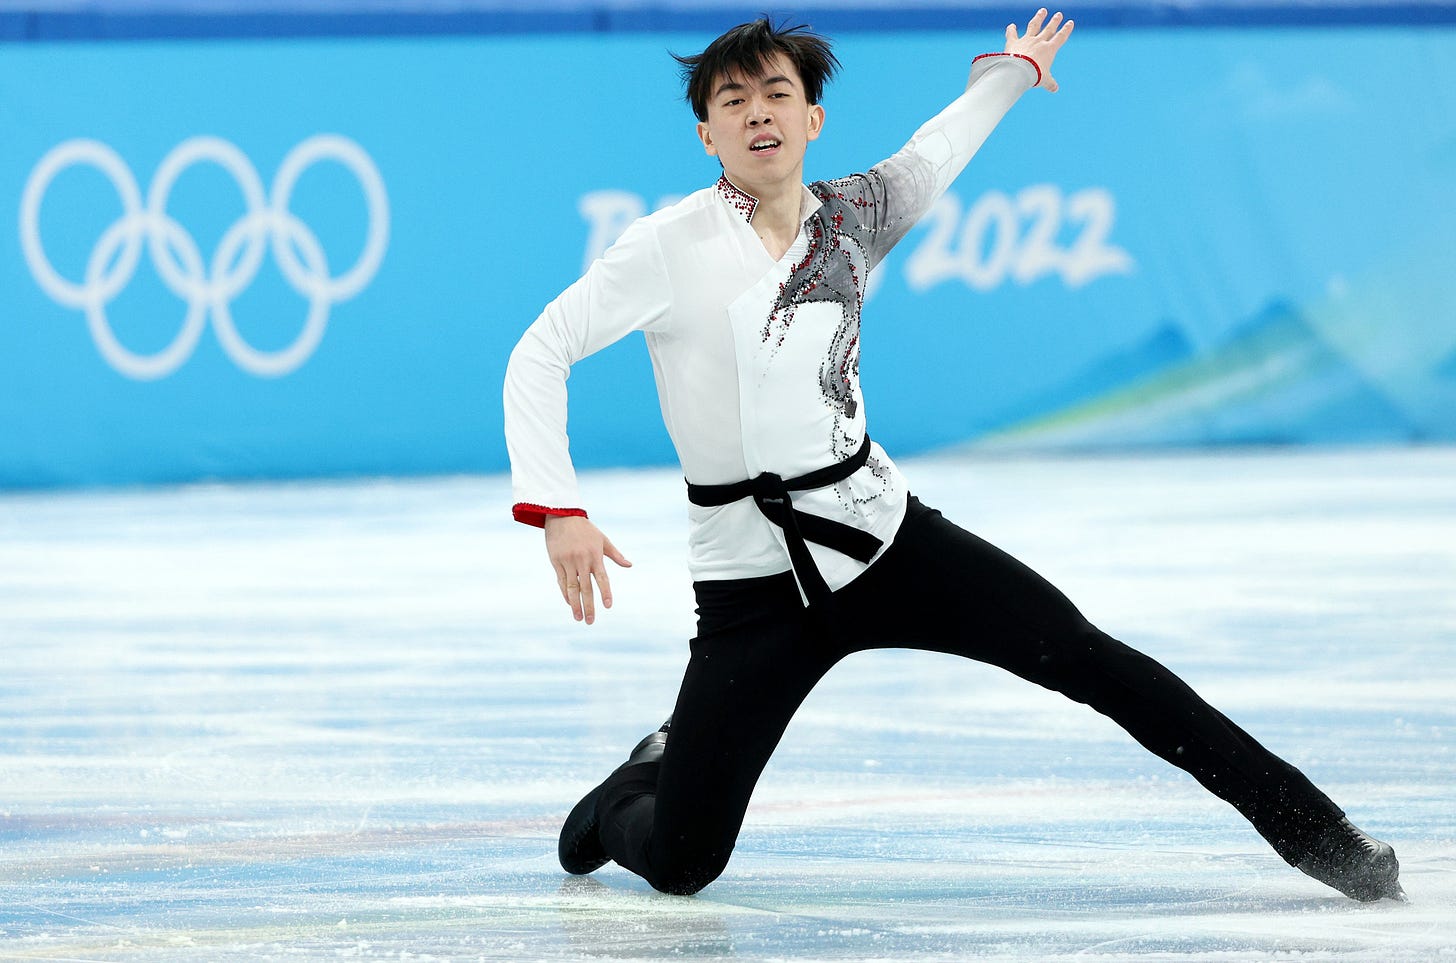 U.S. figure skater Vincent Zhou out of Olympics after positive Covid test